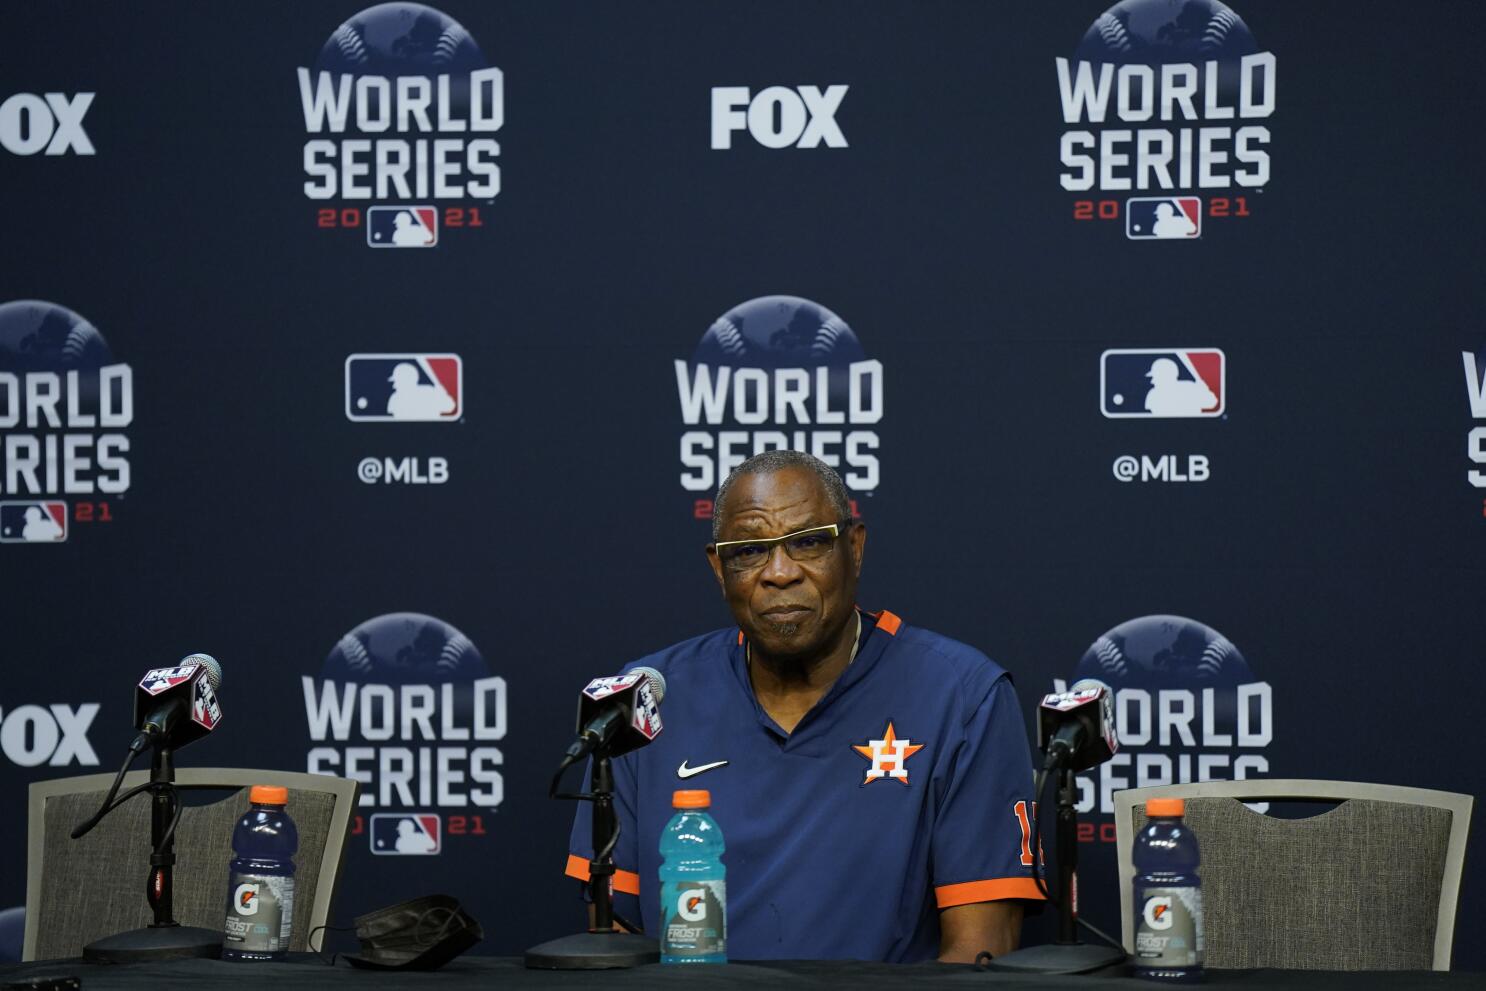 Astros greatness dimmed by MLB mishandling of team's 2017 misdeeds